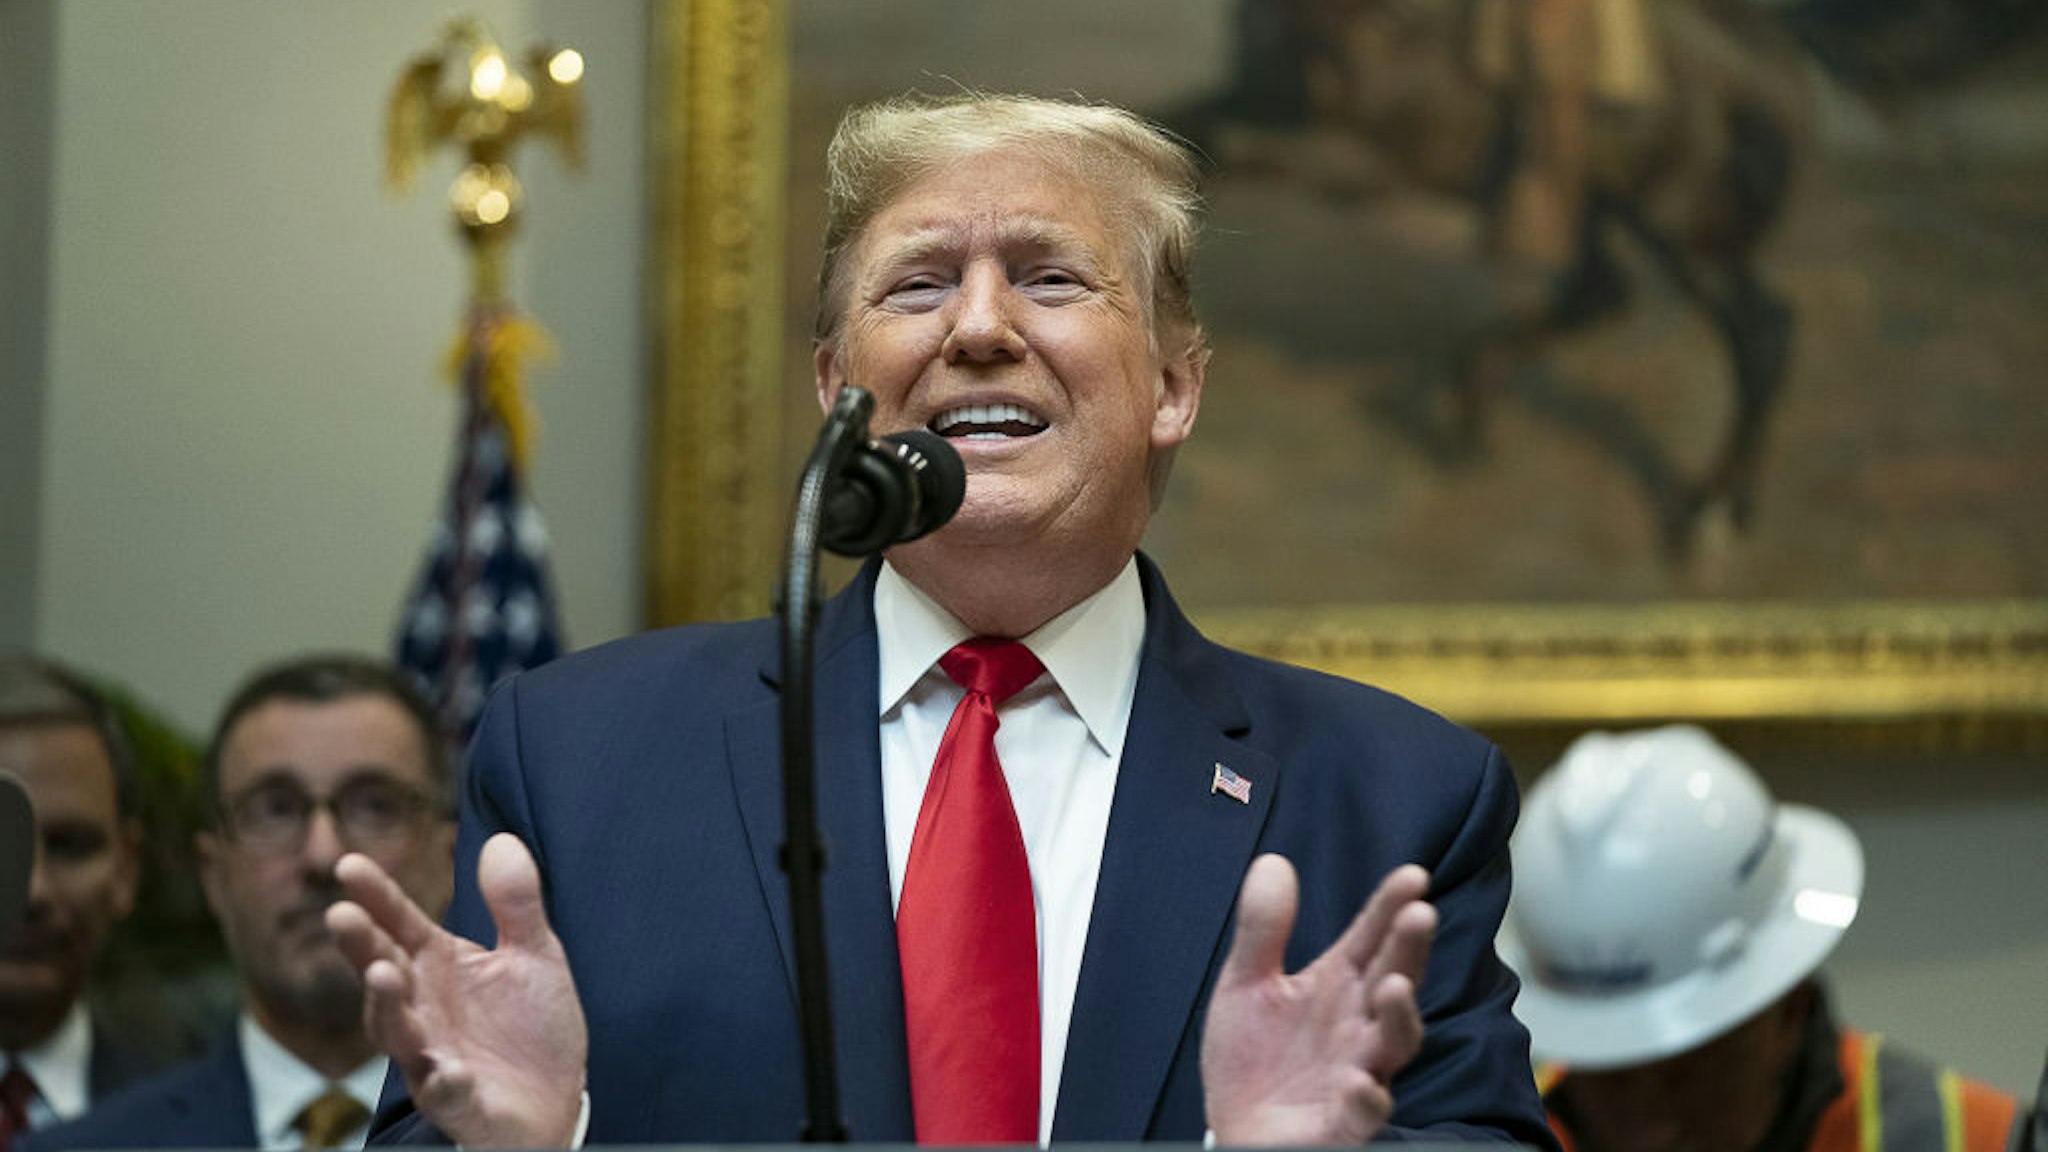 U.S. President Donald Trump speaks during an event to announce proposed new environmental policies at the White House in Washington, D.C., U.S., on Thursday, Jan. 9, 2020.